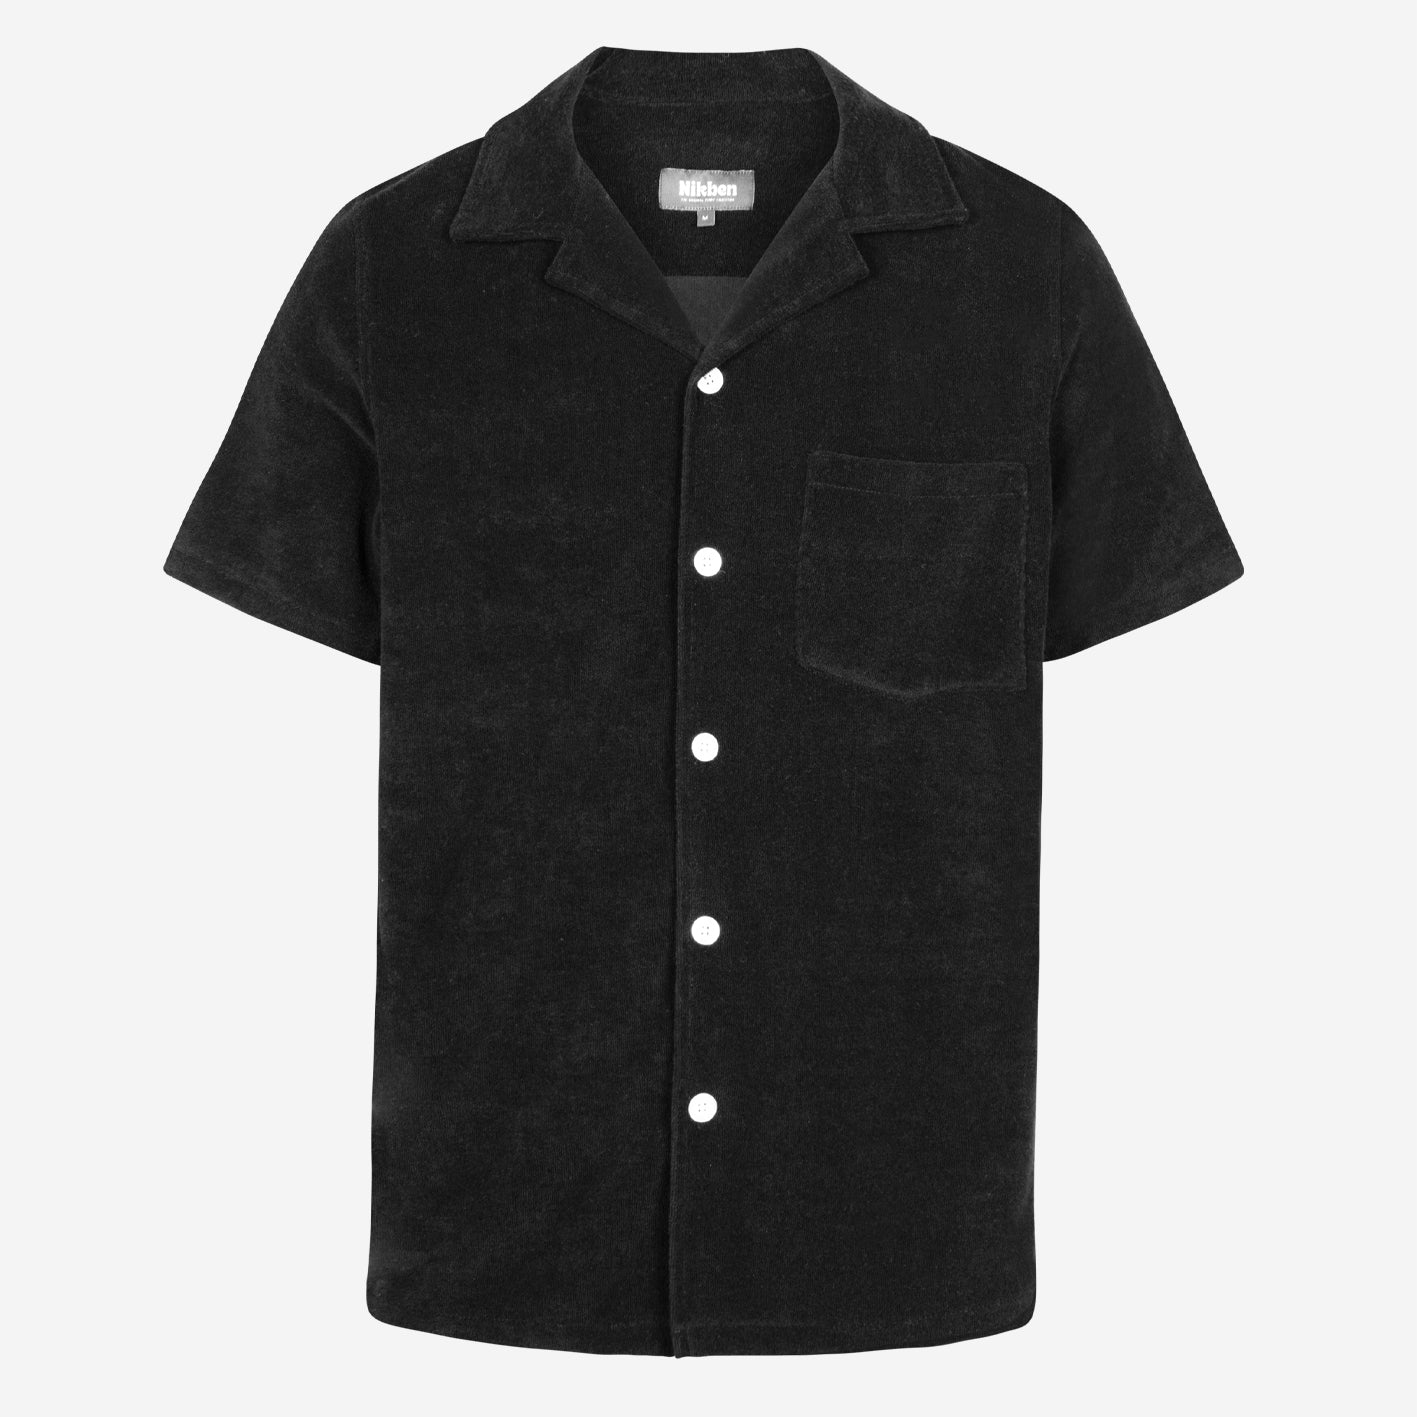 Black short sleeve shirt with white button closure and one chest pocket